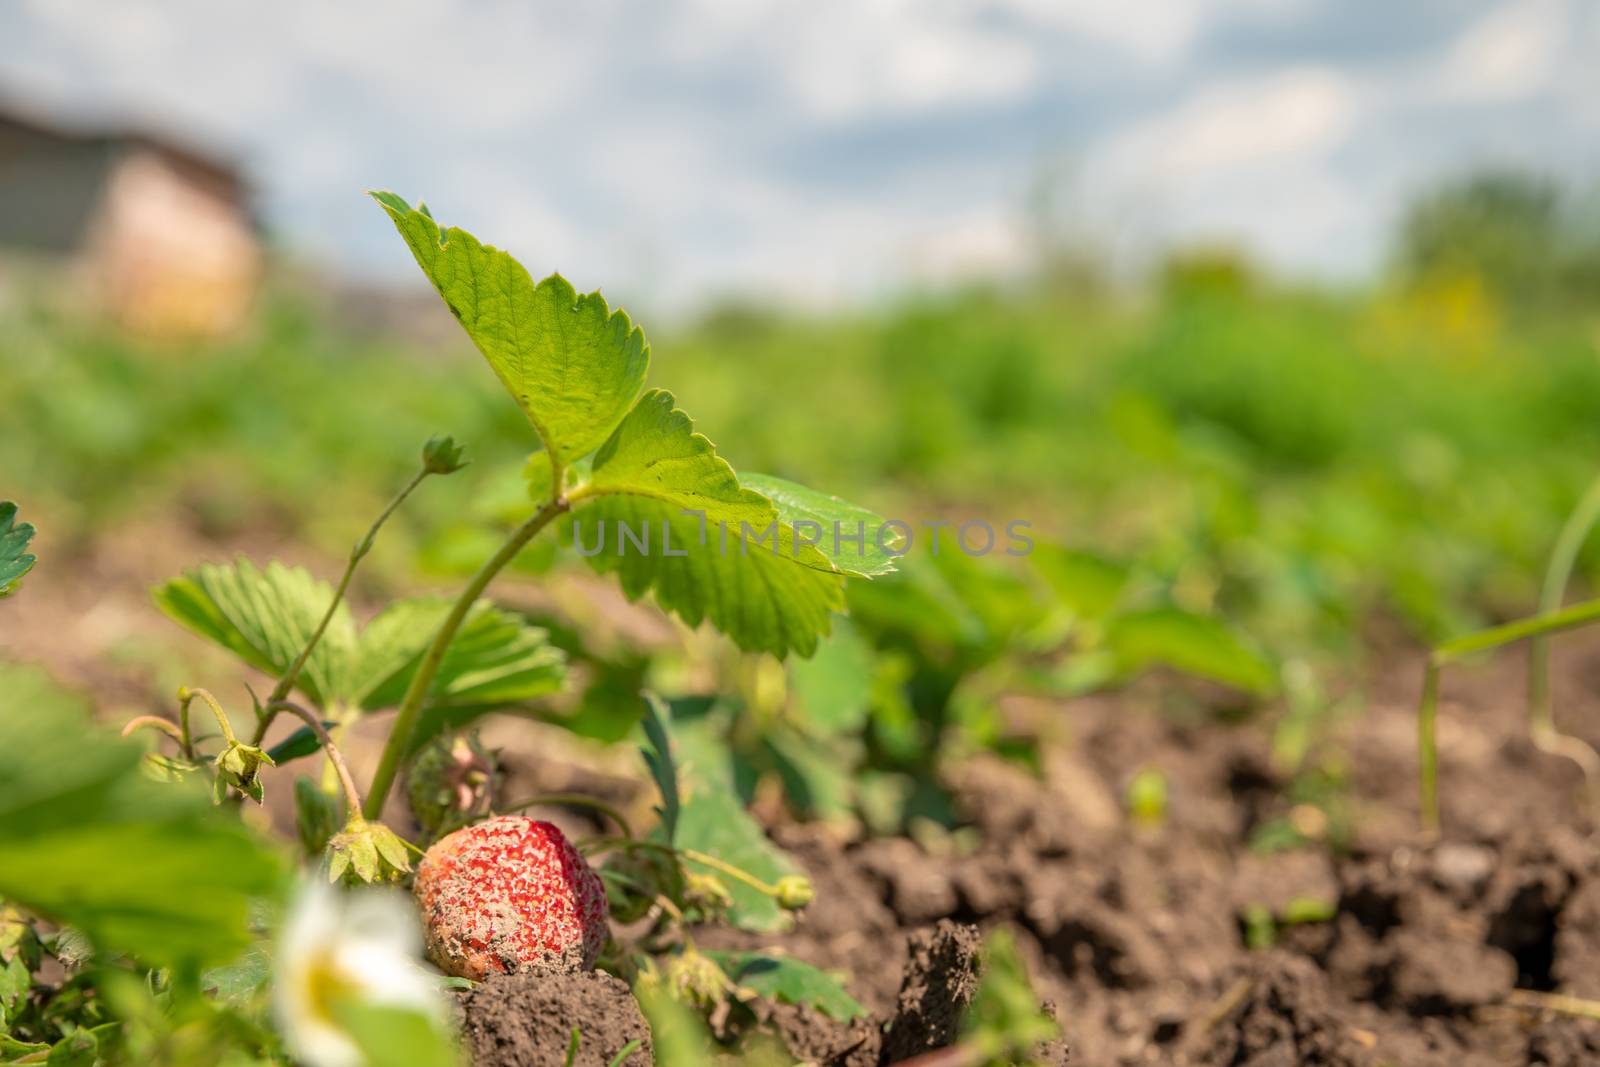 growing strawberries without chemistry on an organic farm by Edophoto